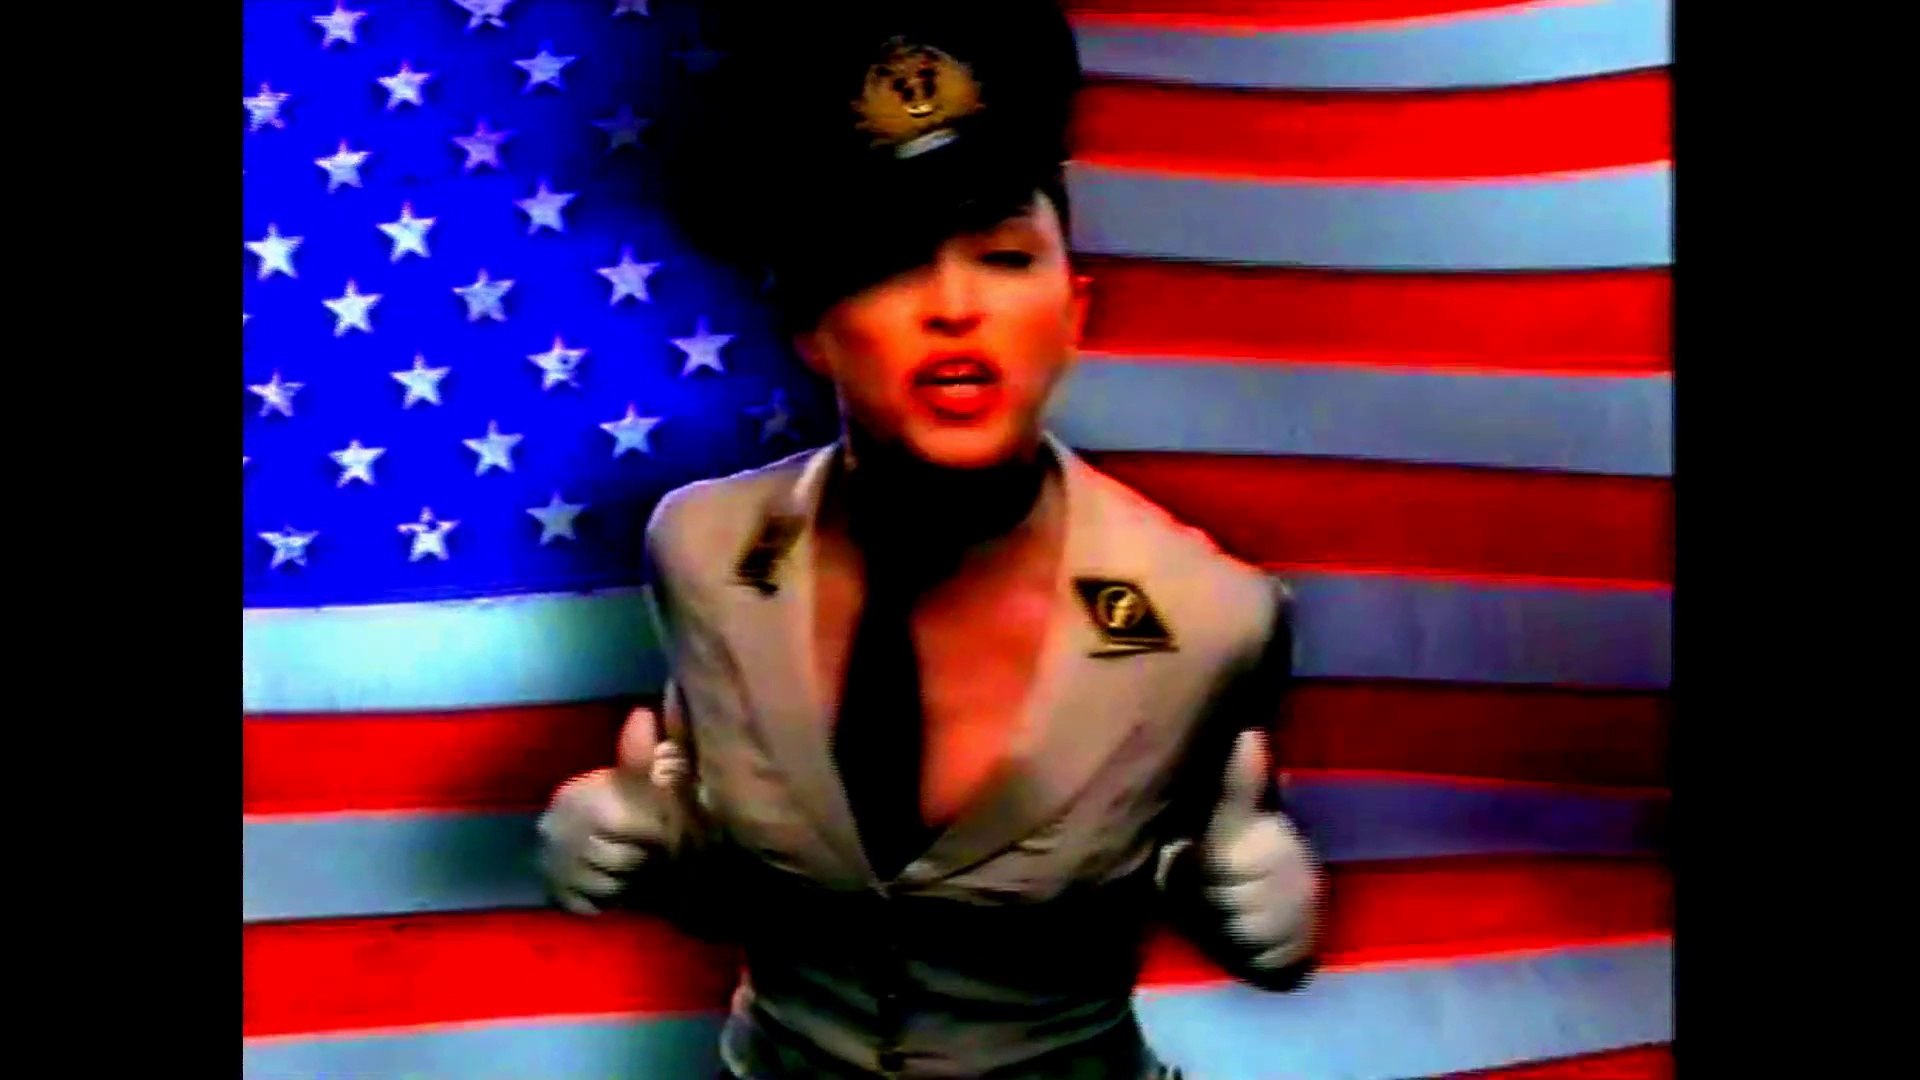 Madonna - American Life (Banned Music Video) (Uncut  Uncensored Version)  [OFFICIAL MUSIC VIDEO] - video Dailymotion